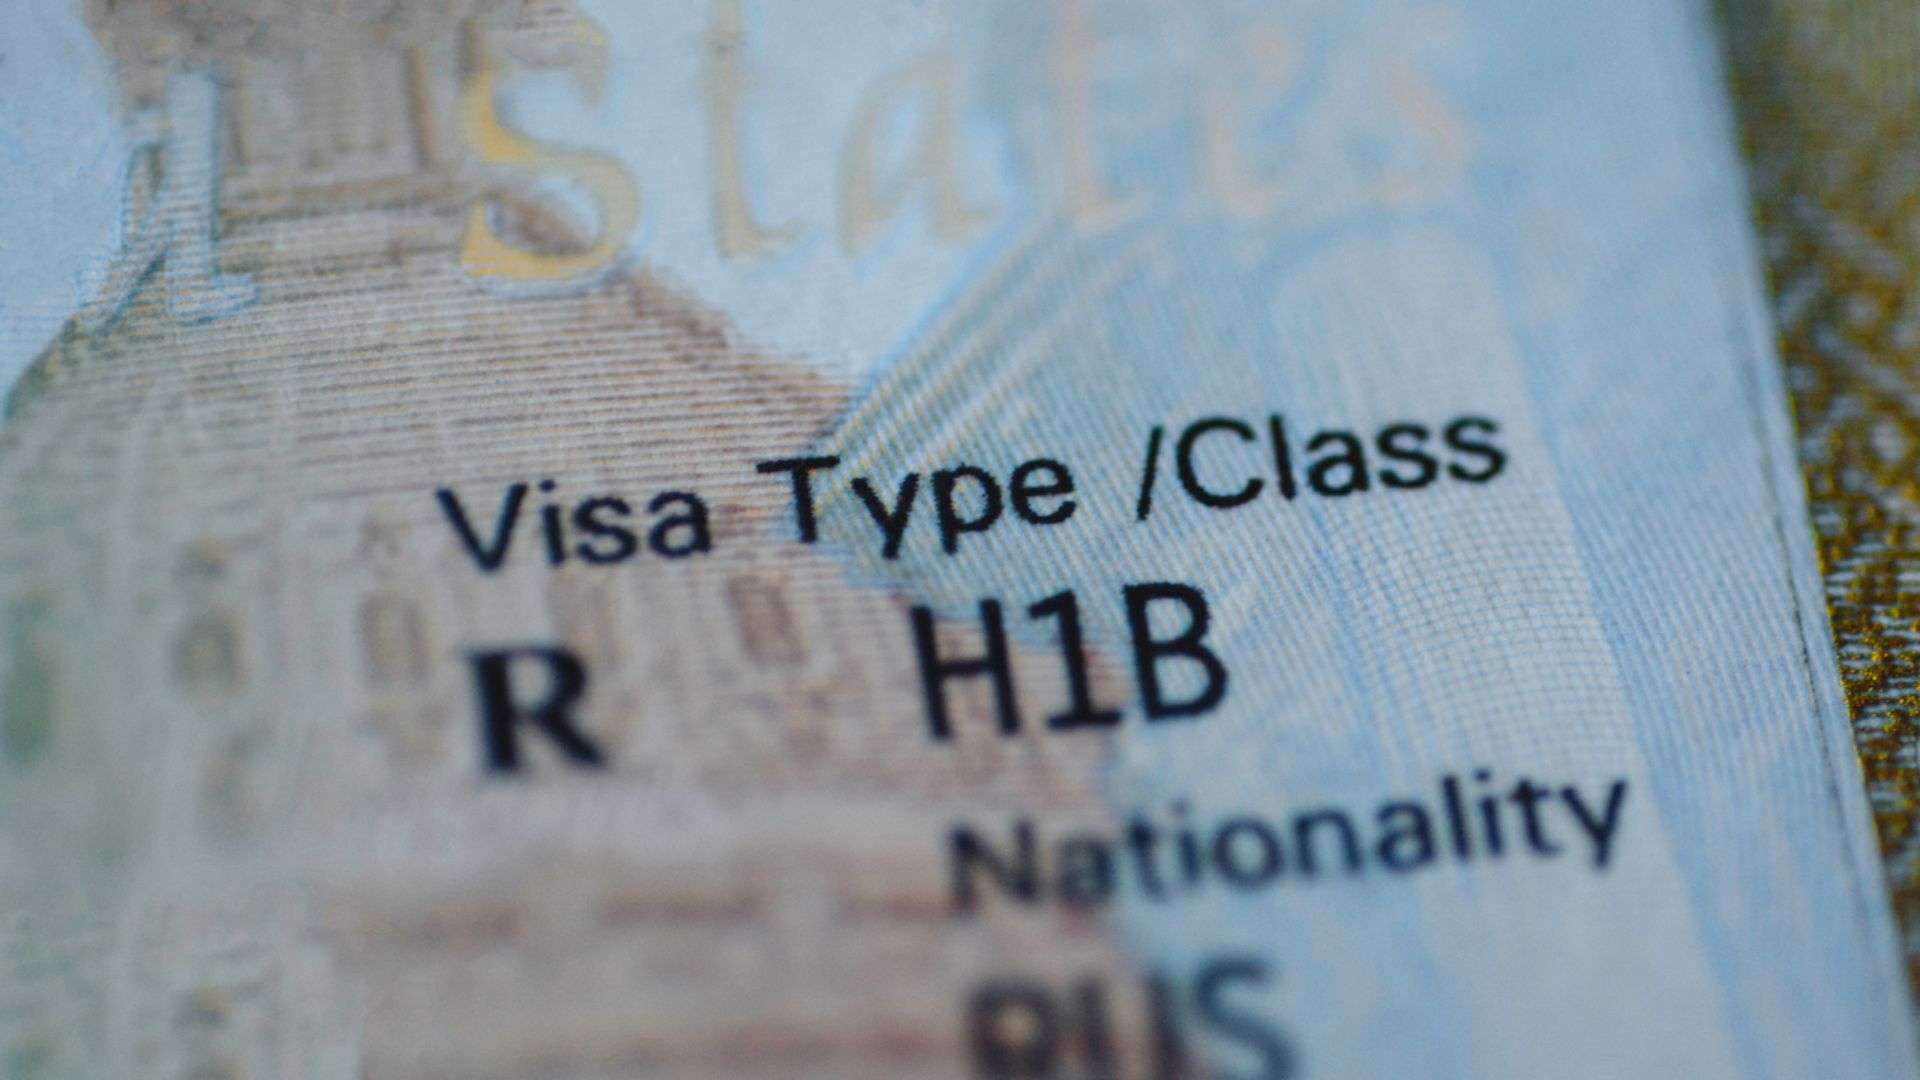 H-1B visa revocations double amid legal battle and regulatory crackdown